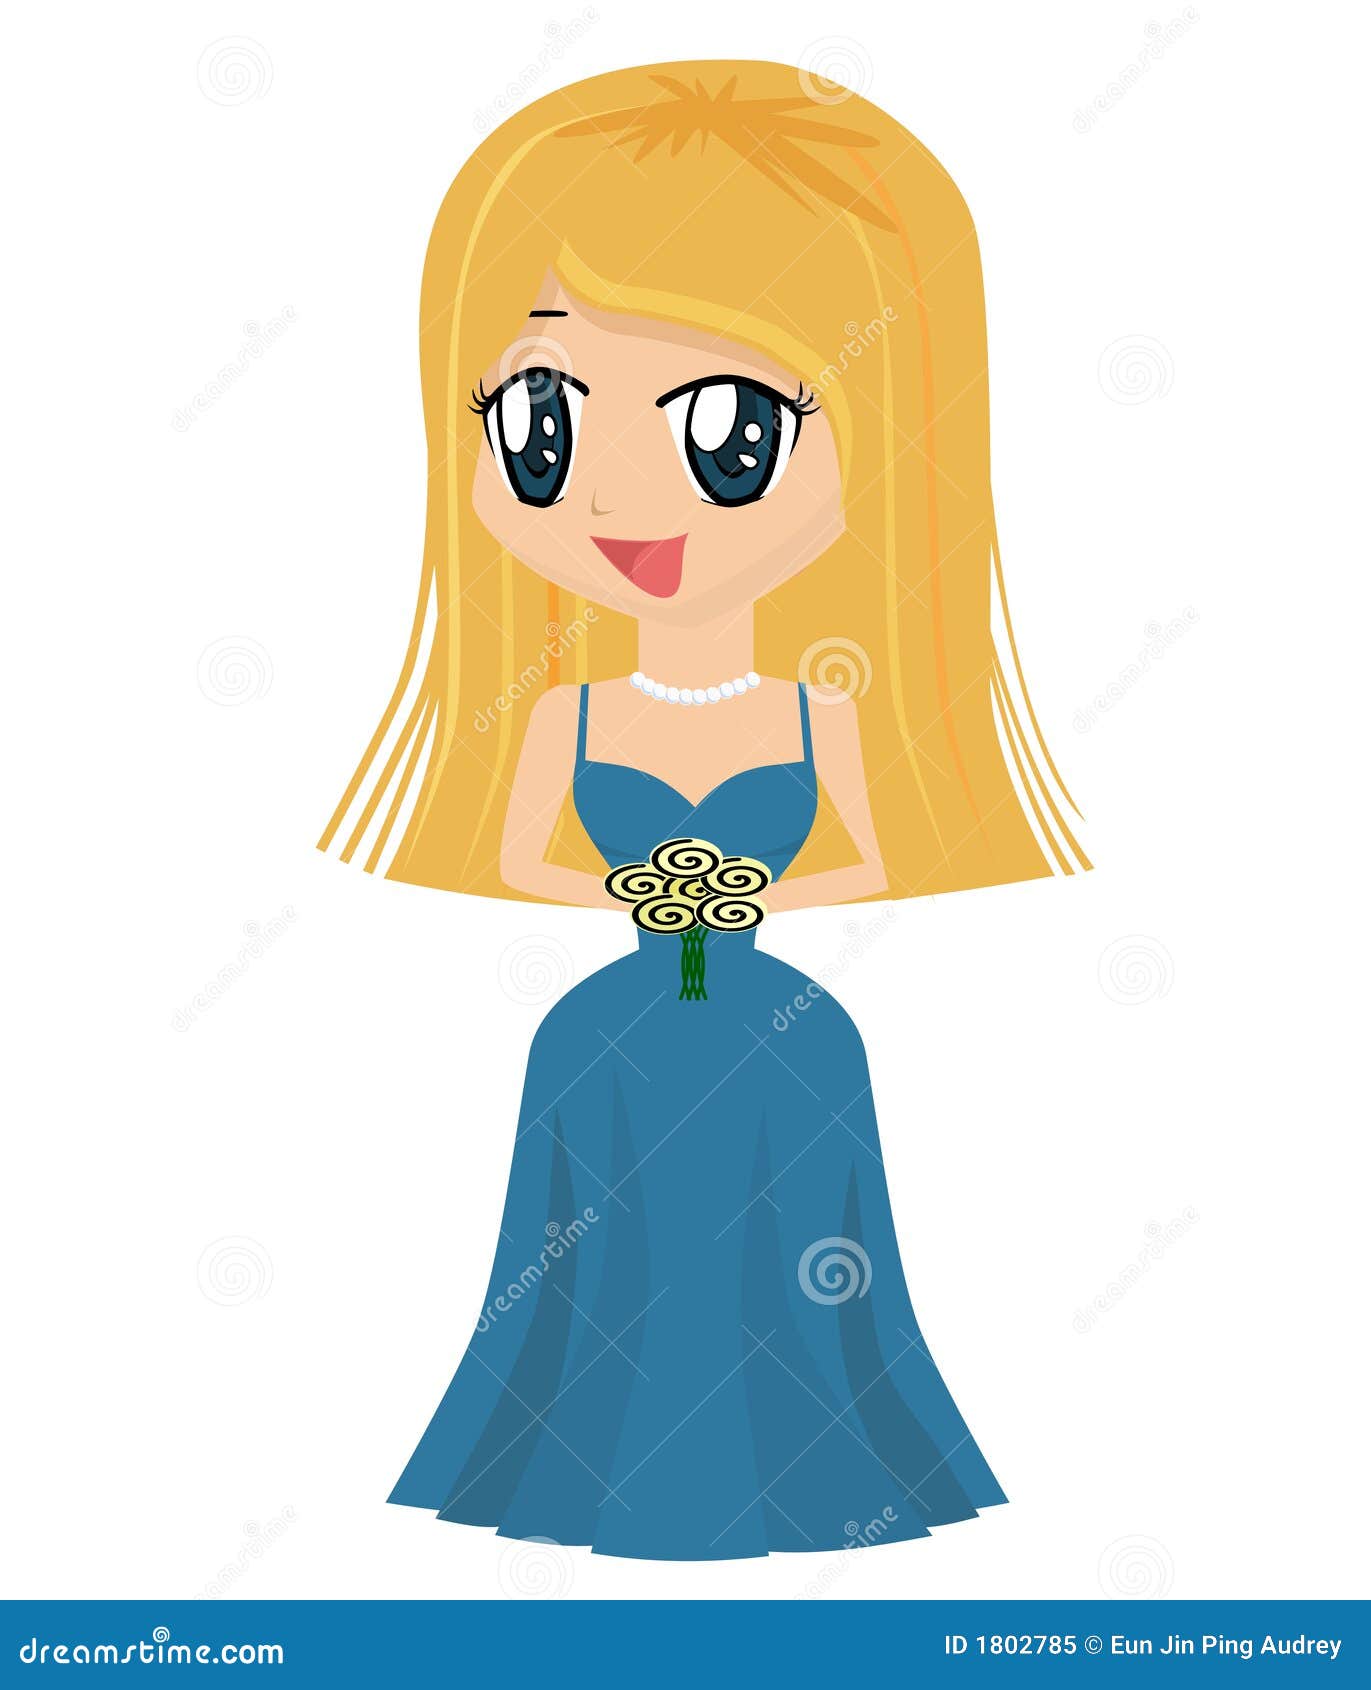 Cartoon Girl in Gown stock vector. Illustration of female - 1802785